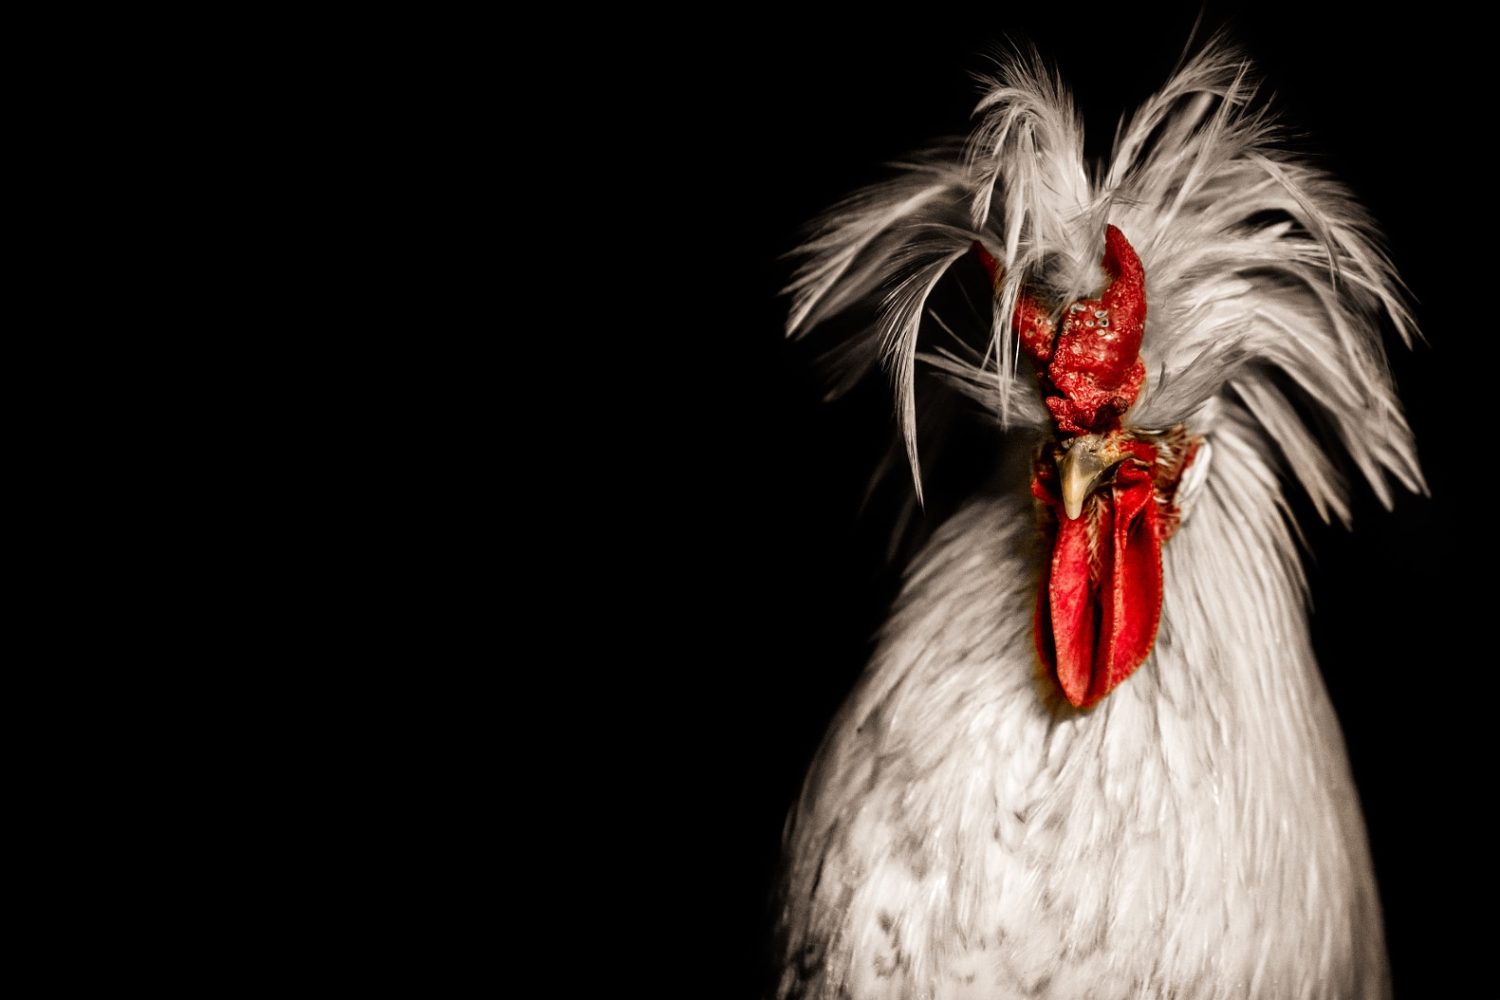 Regal Rooster Photos to Ring in the Lunar New Year!